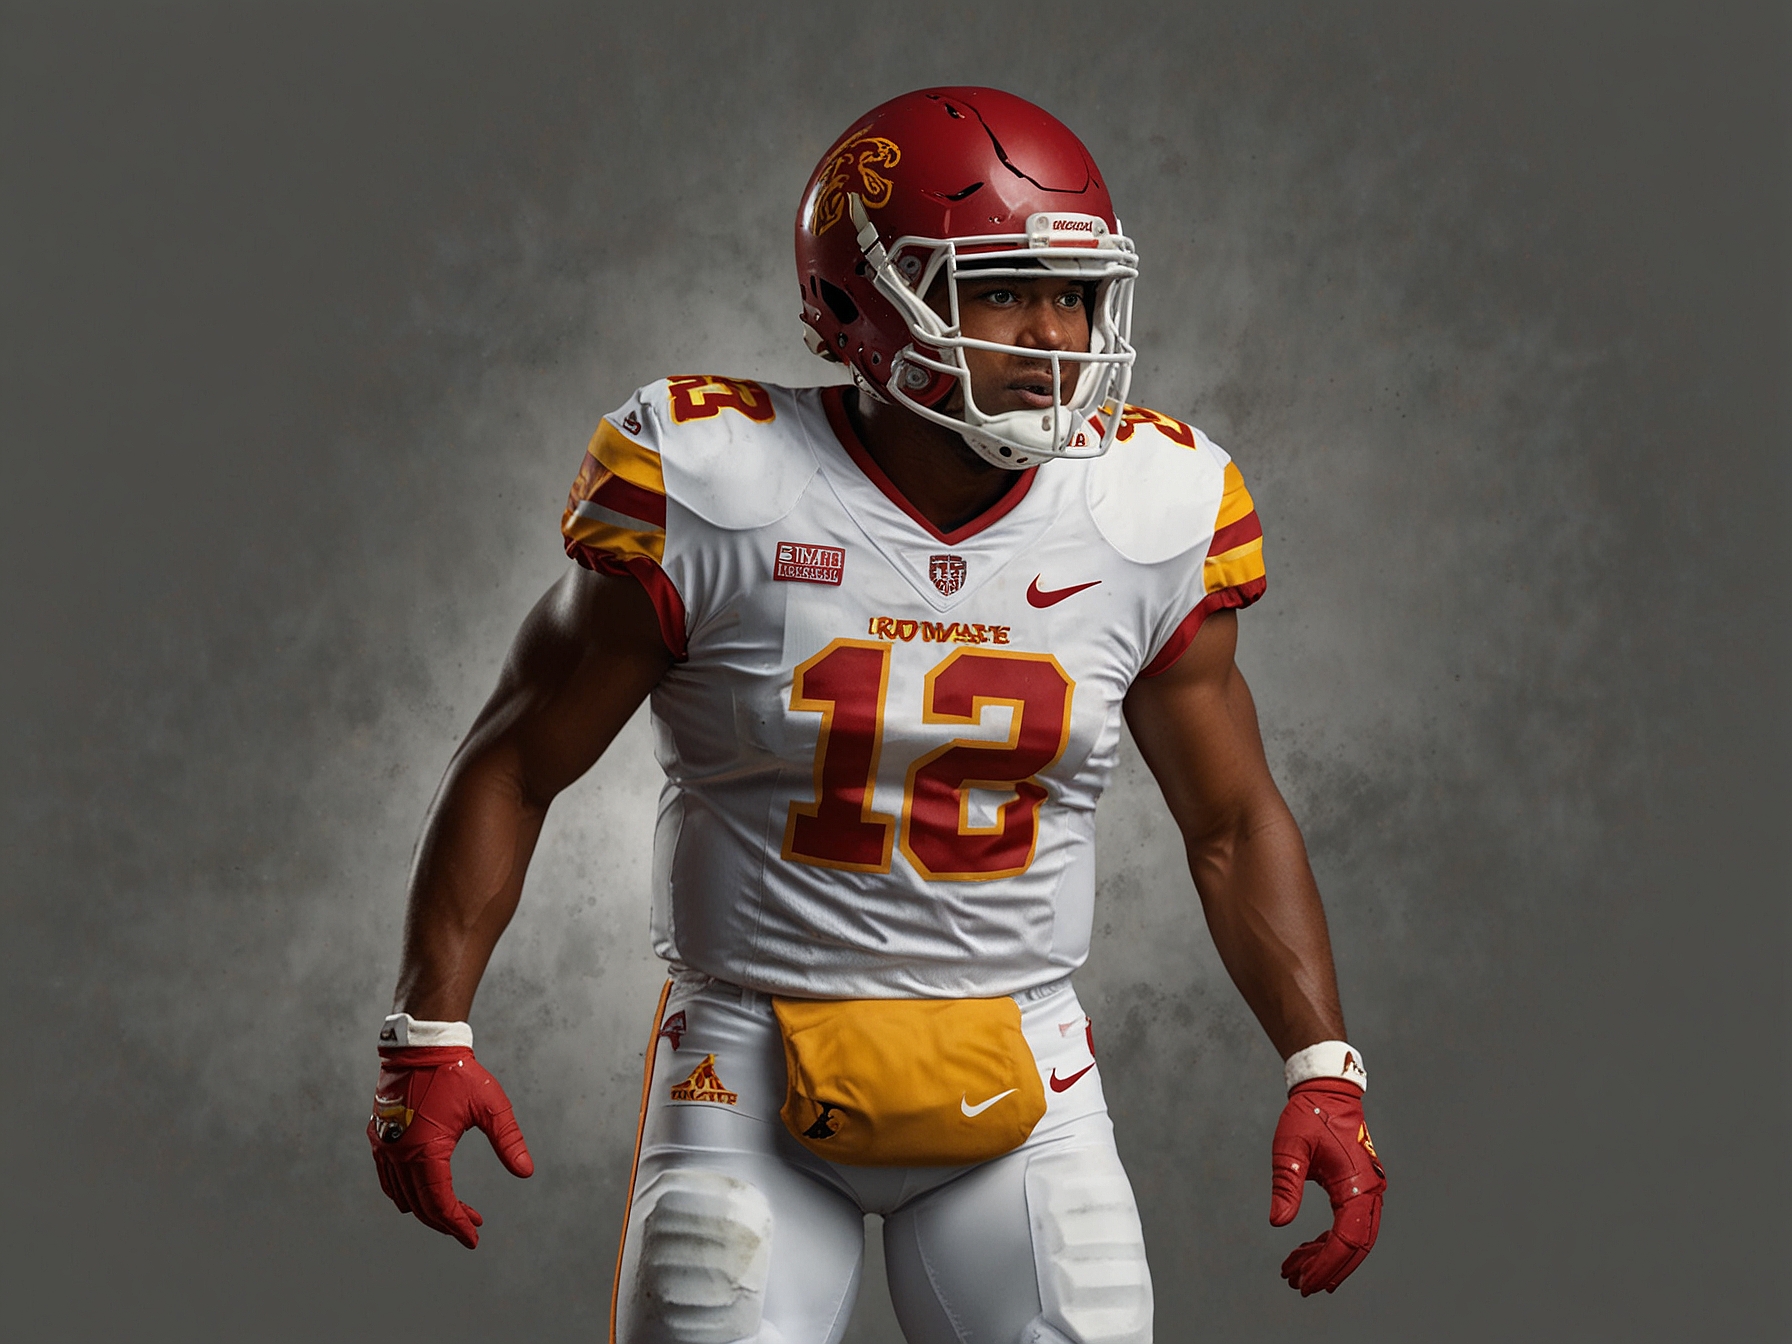 An Iowa State Cyclones player stands proudly in the new white jersey, showcasing its sleek design with the team's logo, red and gold accents, and advanced fabric technology.